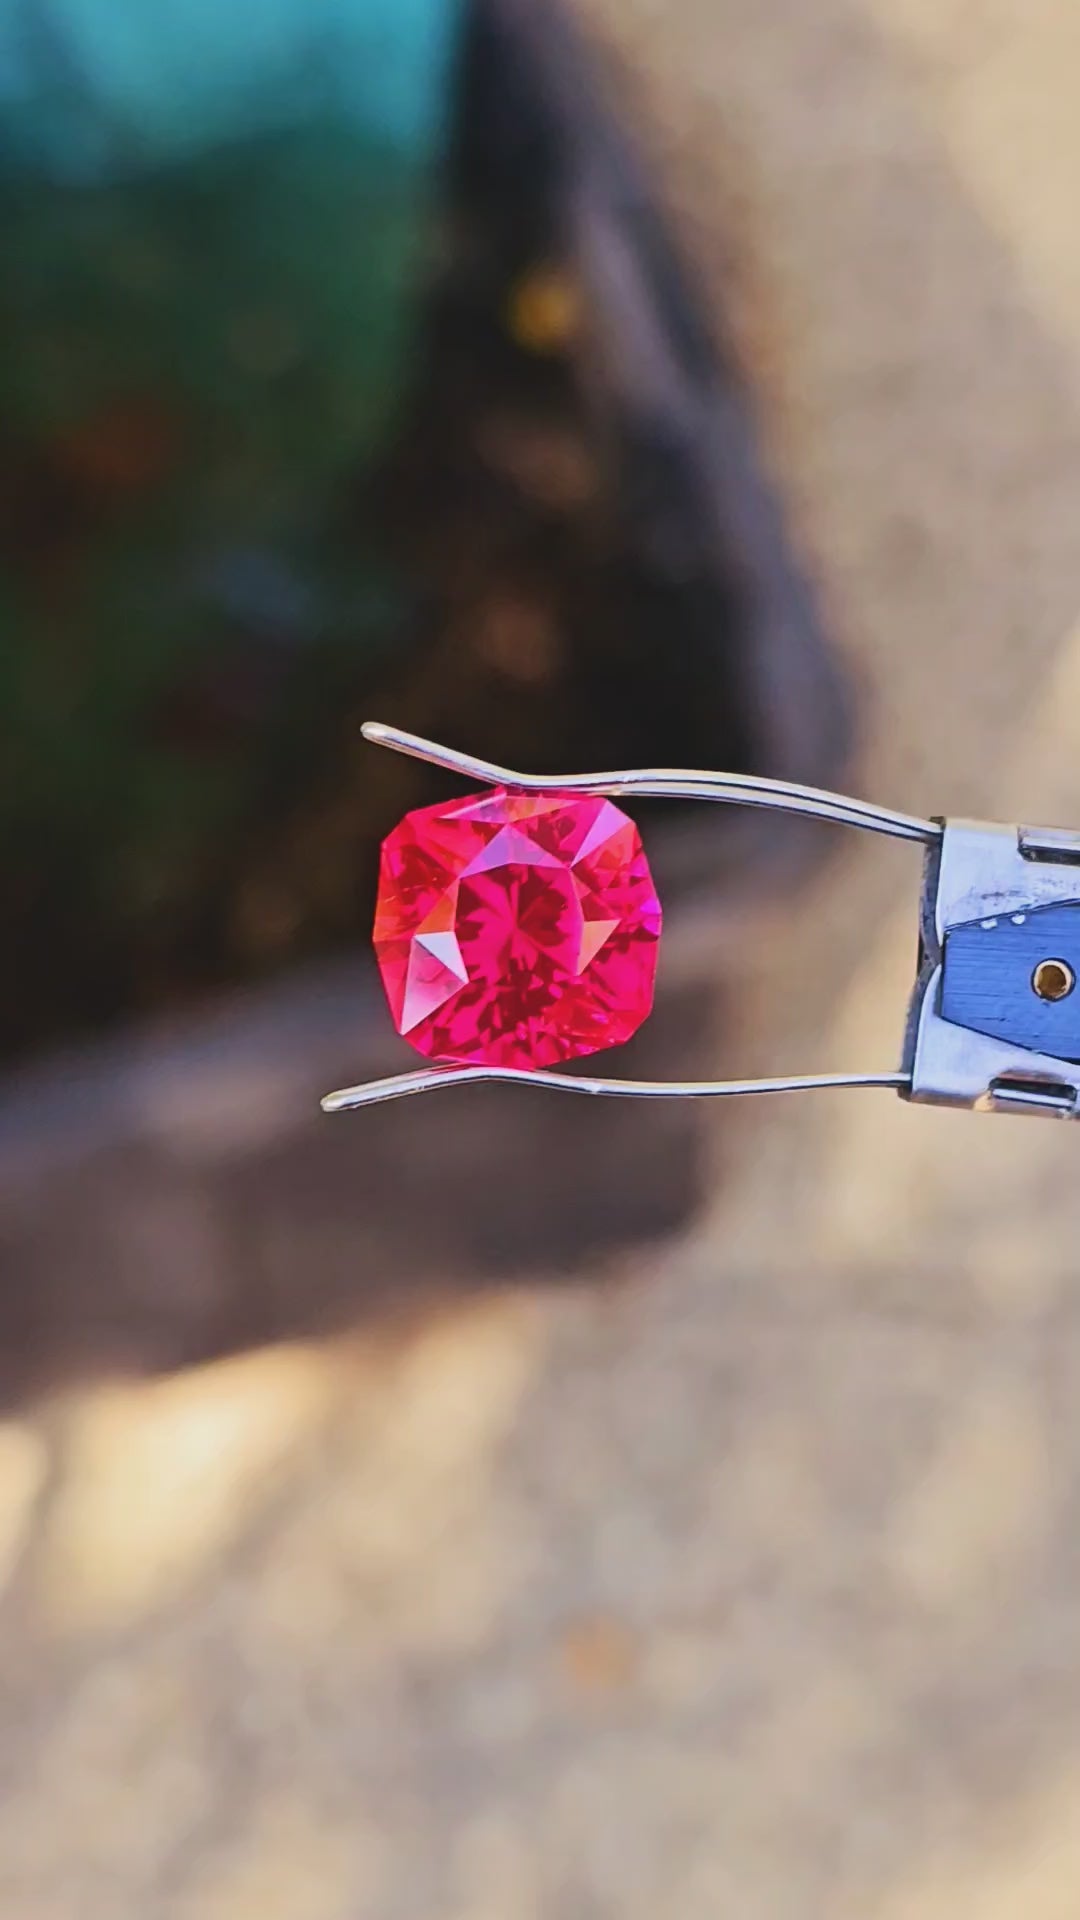 Fire Red Kyropoulos Ruby, House Of Sylas Cushion Cut, 12.35 Carats